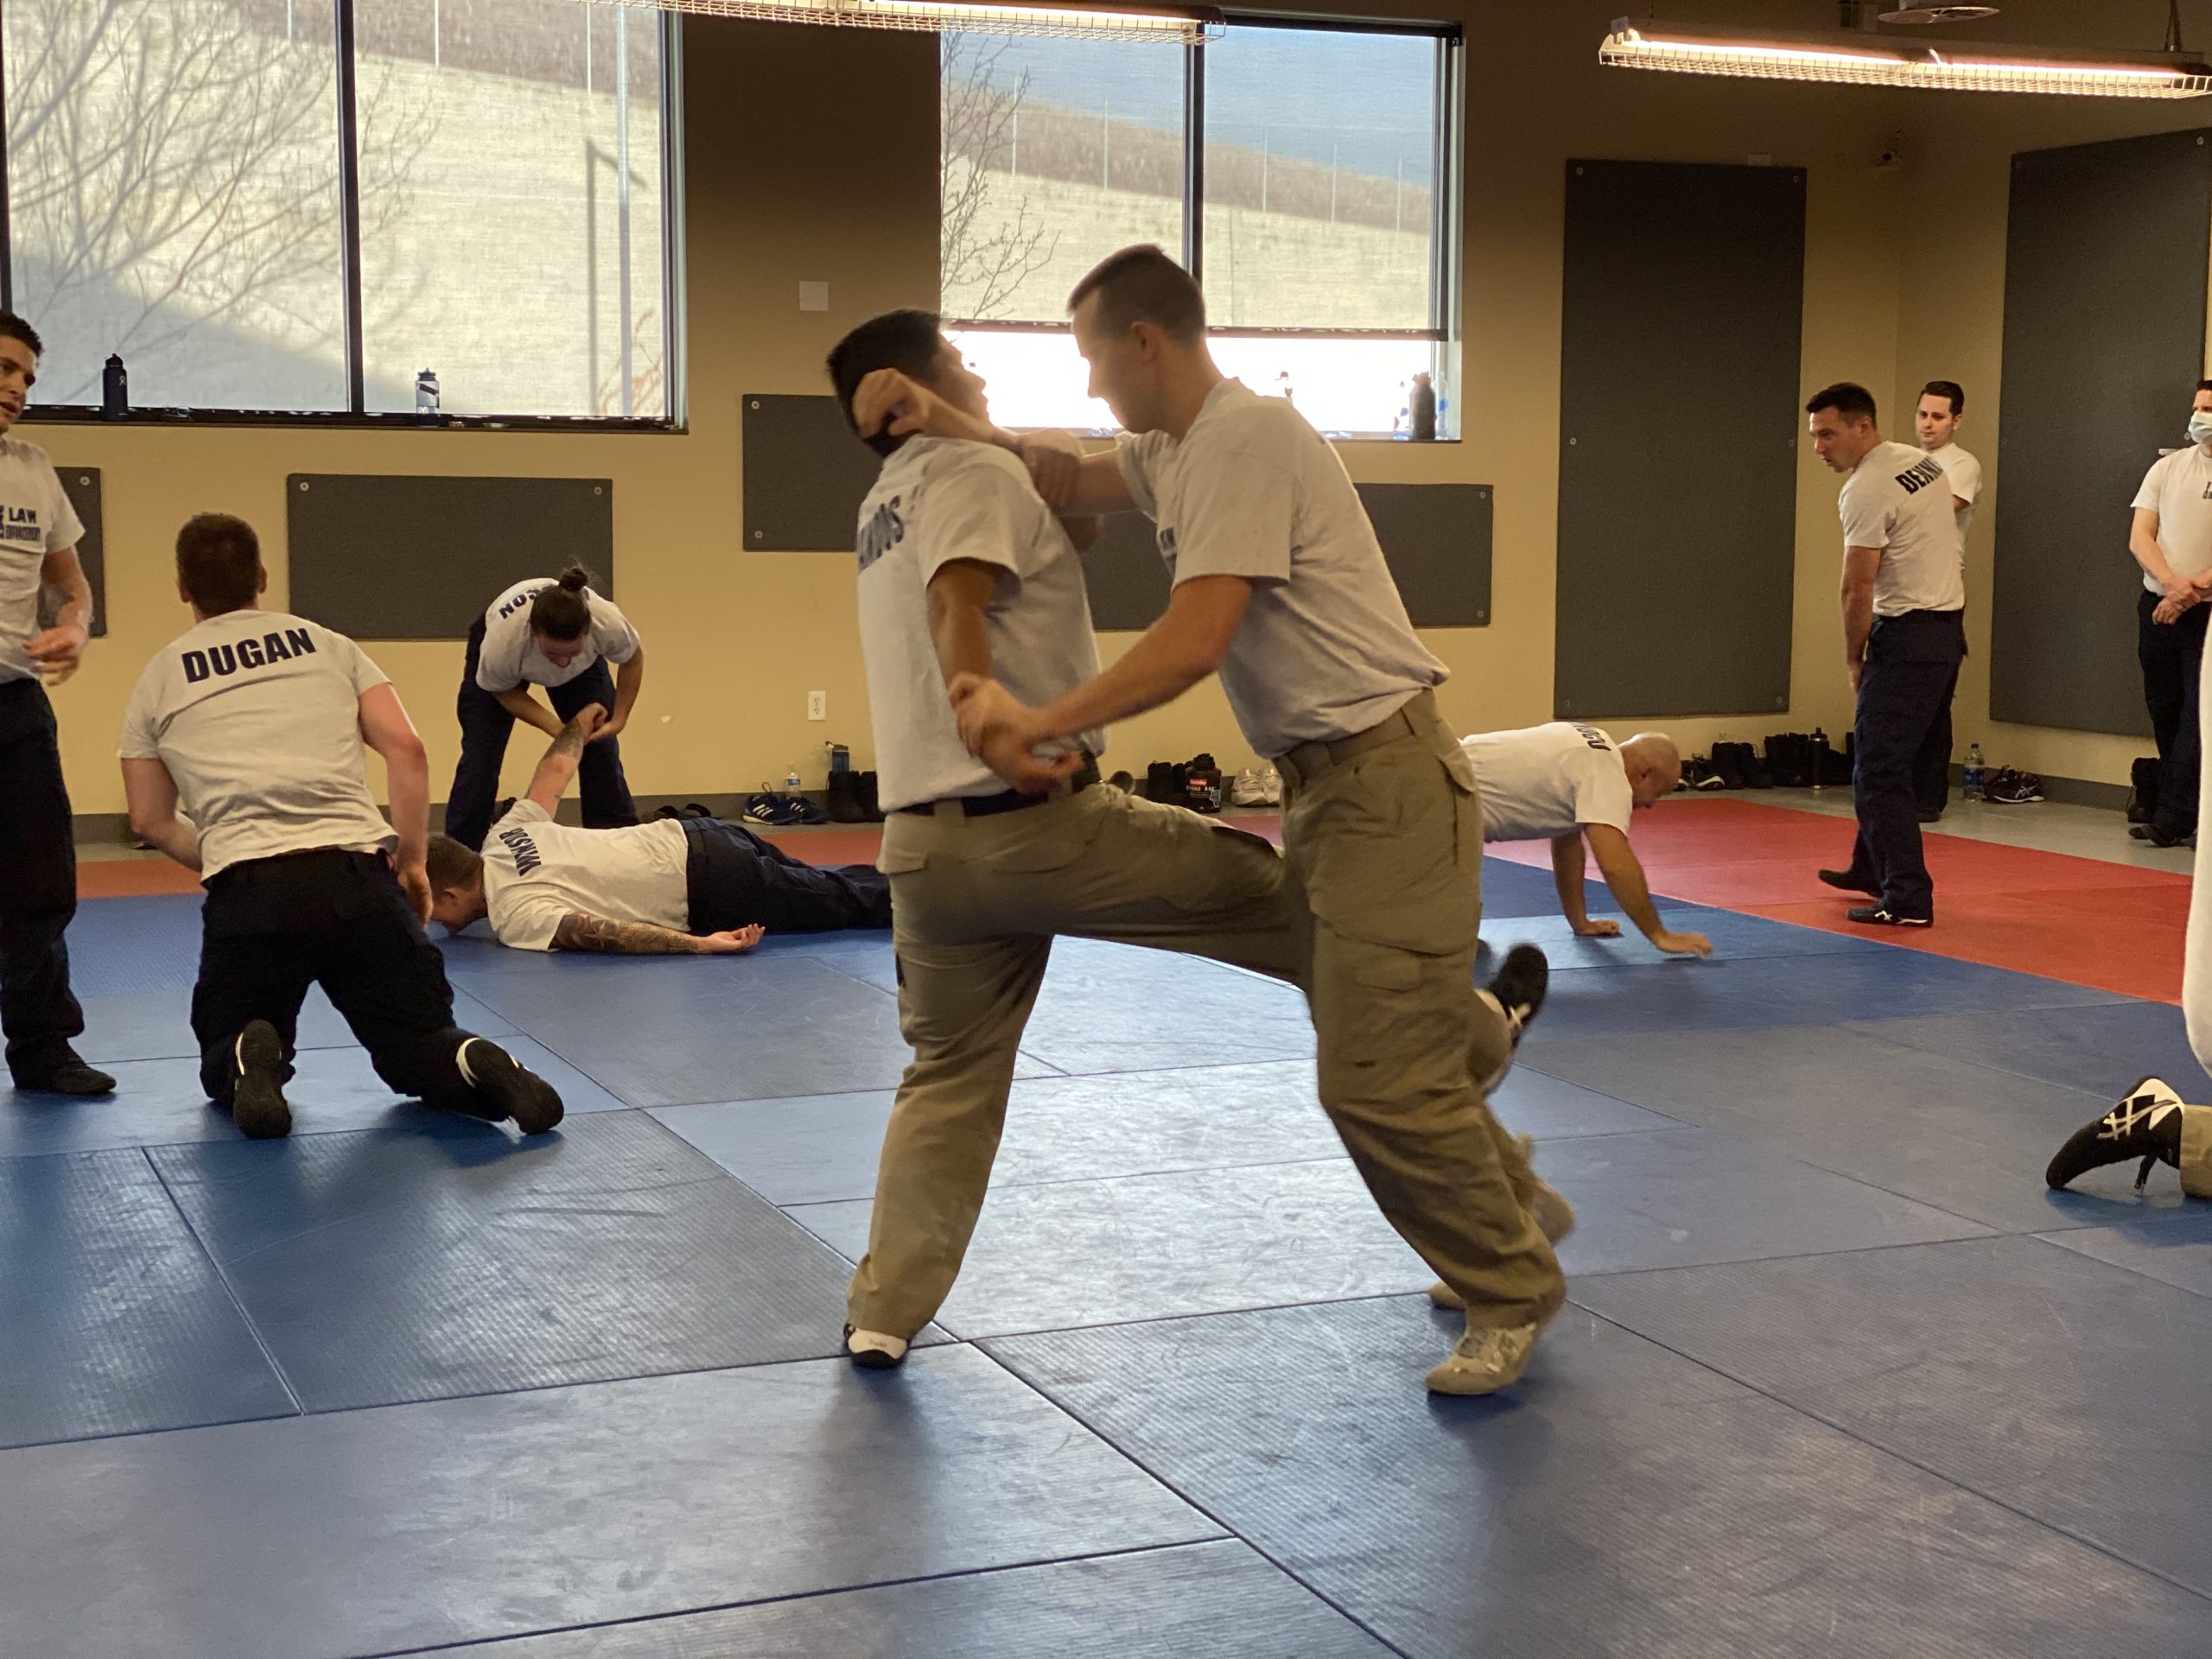 Two cadets perform defensive tactics maneuvers on each other.